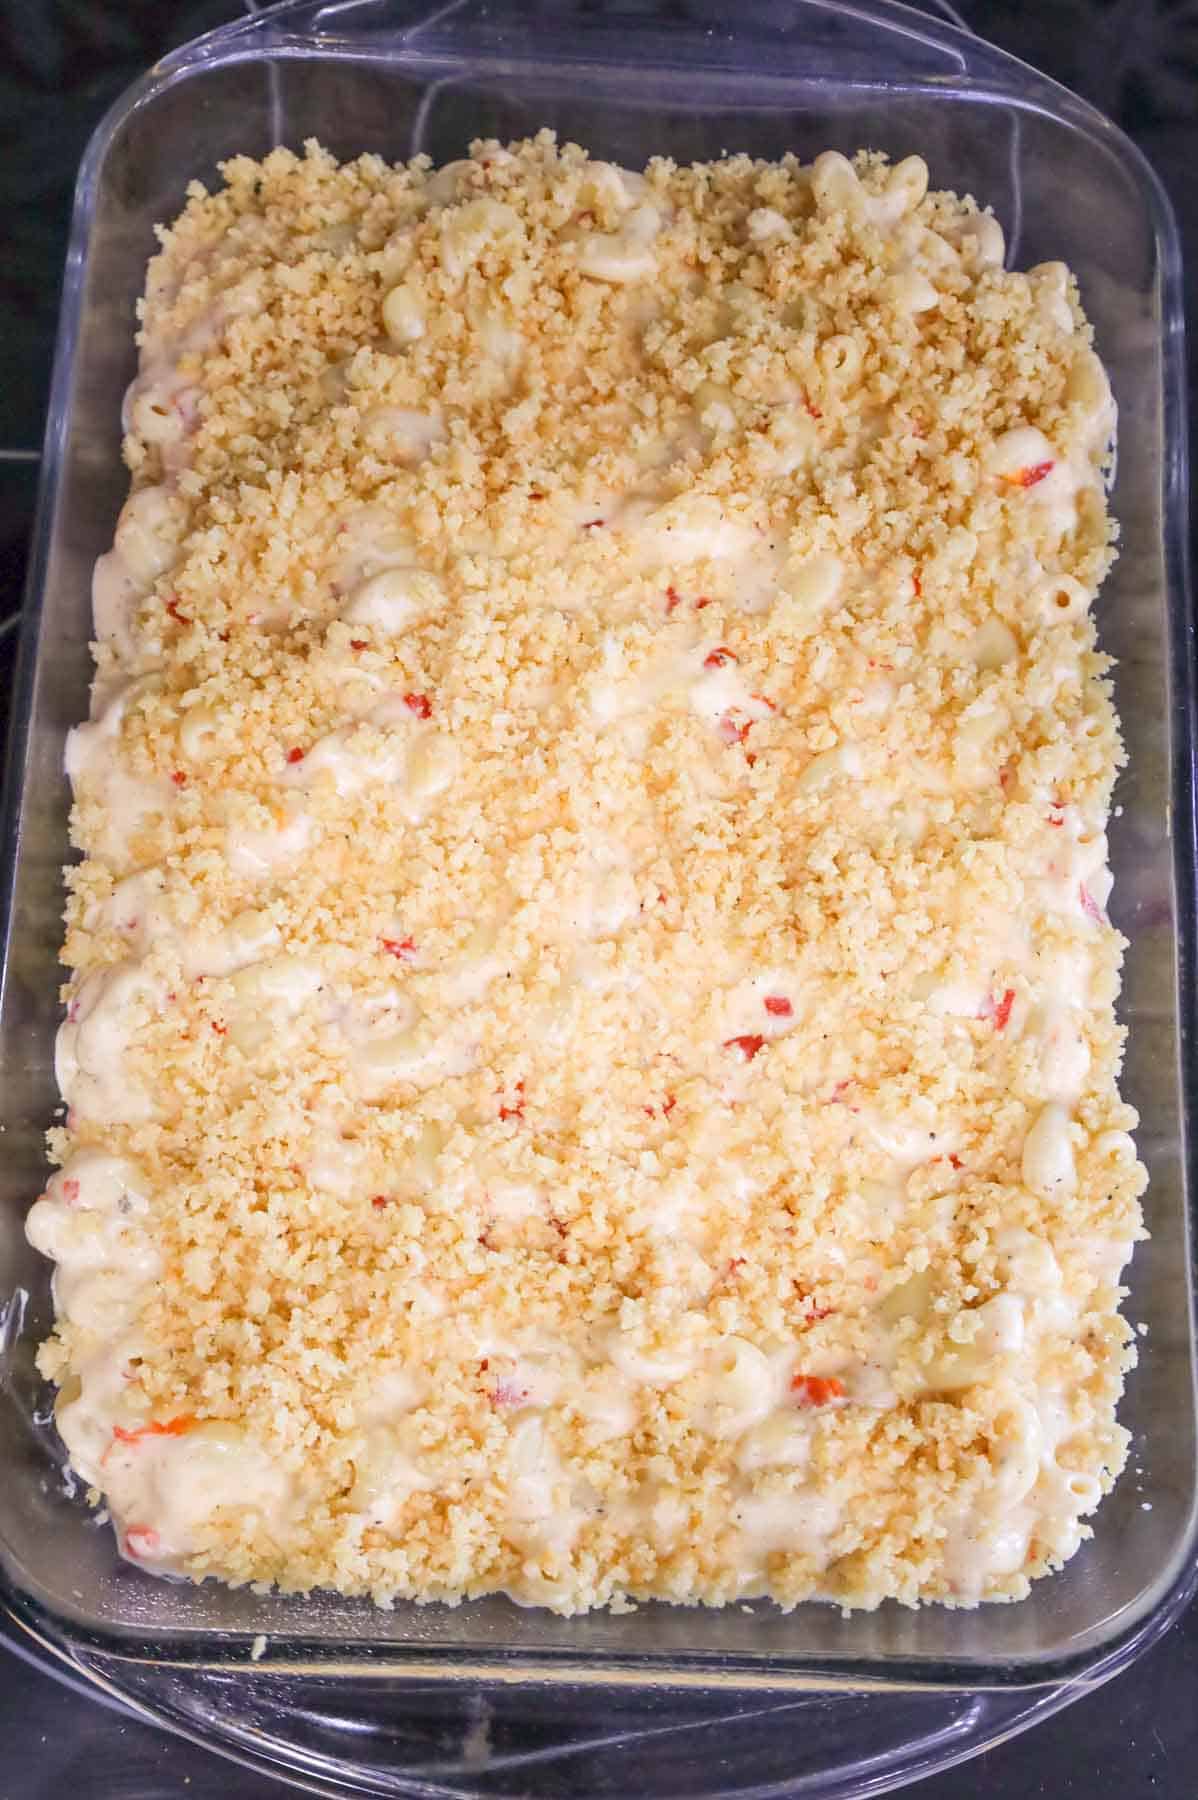 Ritz cracker crumbs sprinkled over mac and cheese in a baking dish